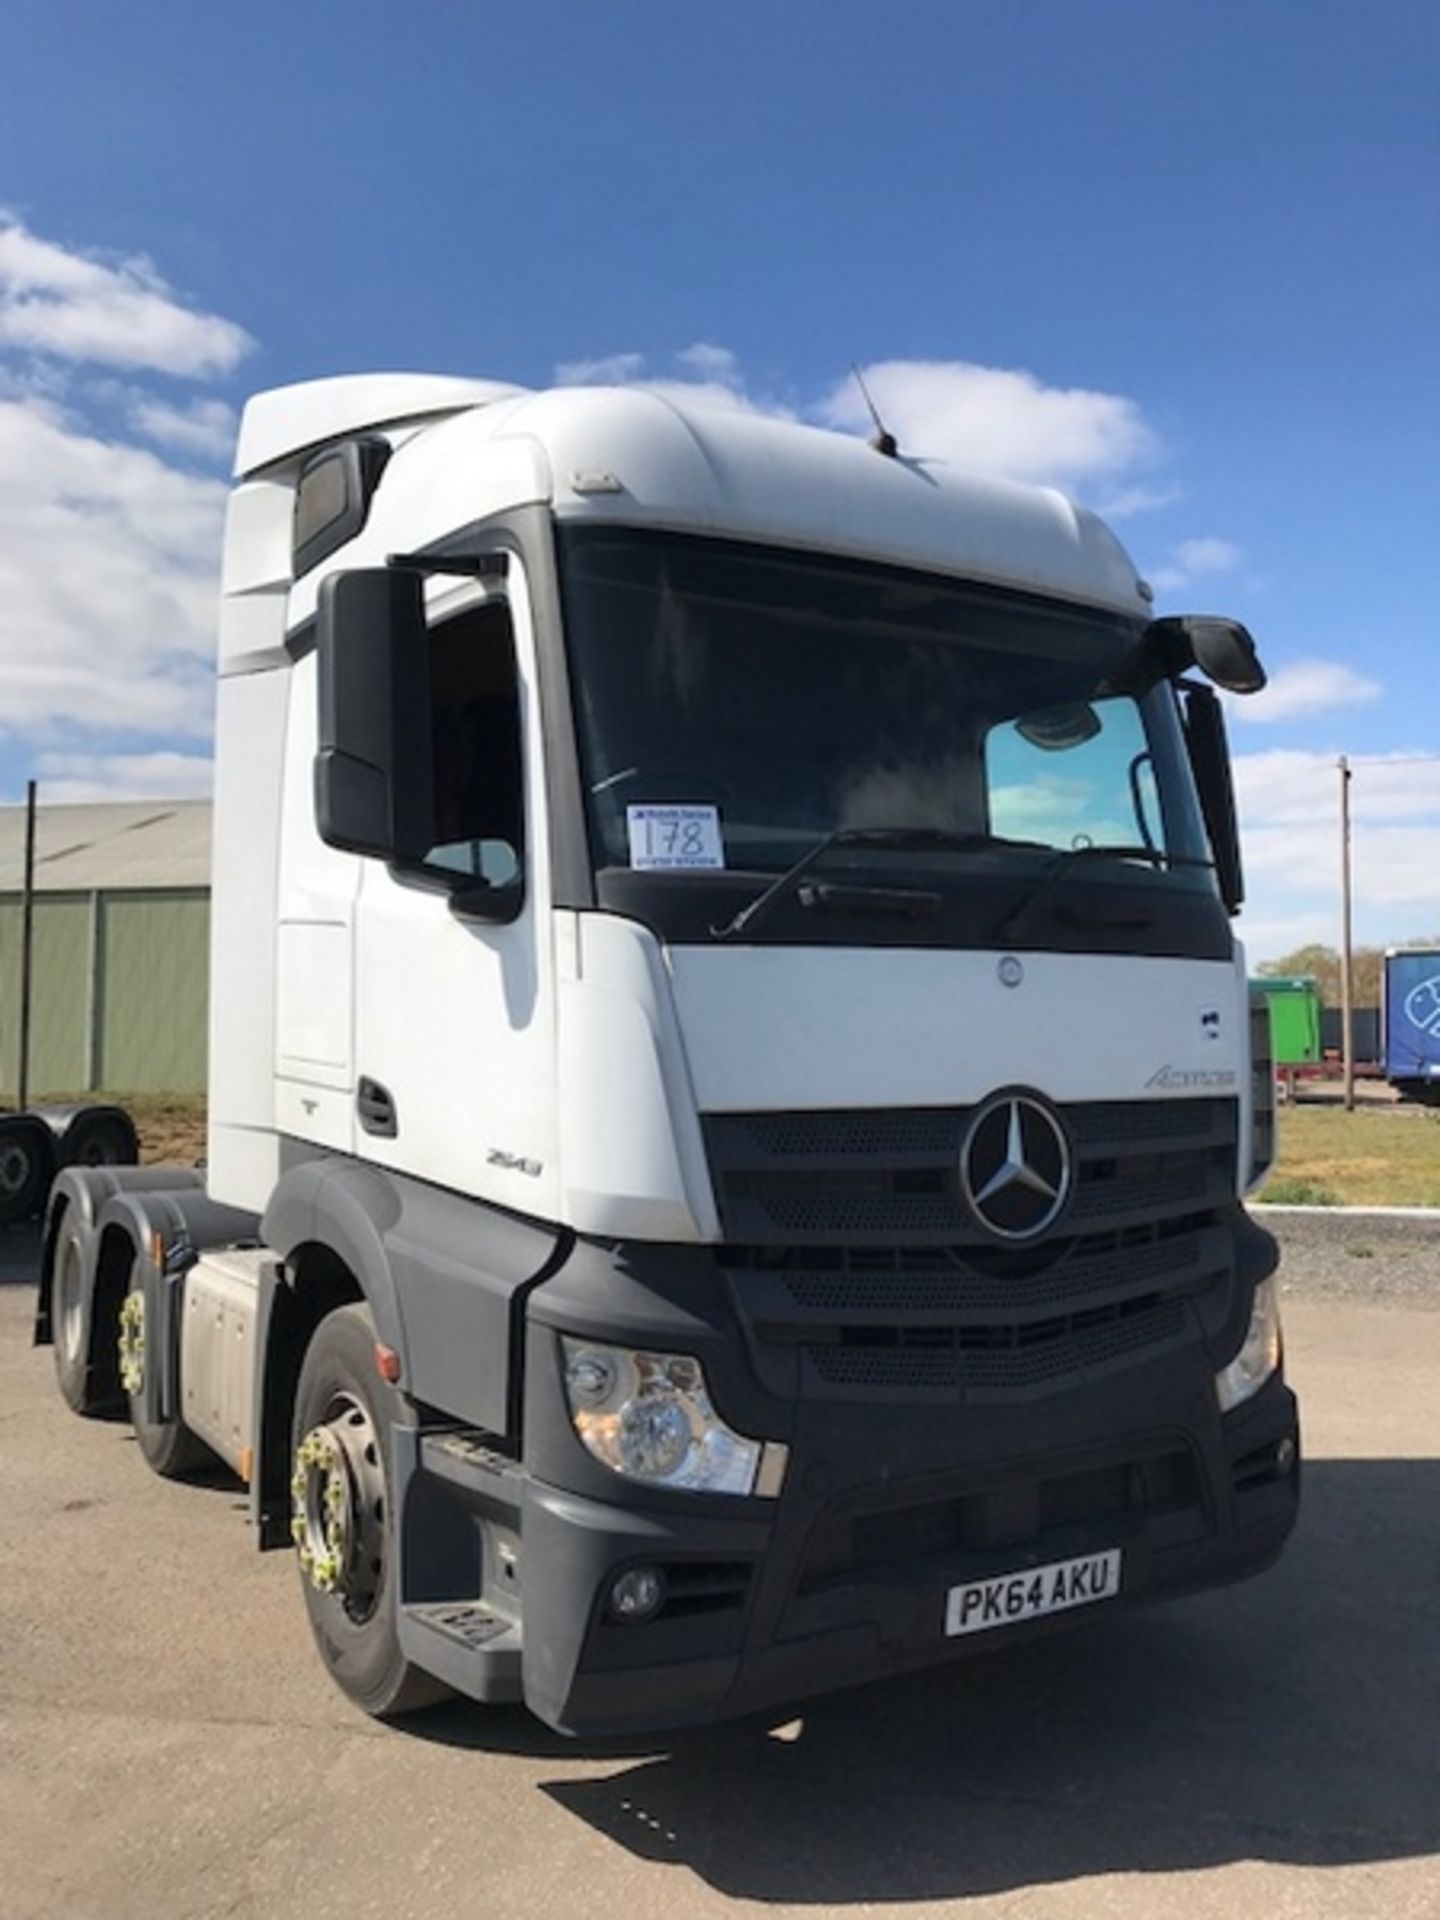 MERCEDES-BENZ ACTROS 2543 Bluetec 6 Midlift Tractor Unit 6x2 Diesel Automatic - PK64AKU - Image 4 of 7